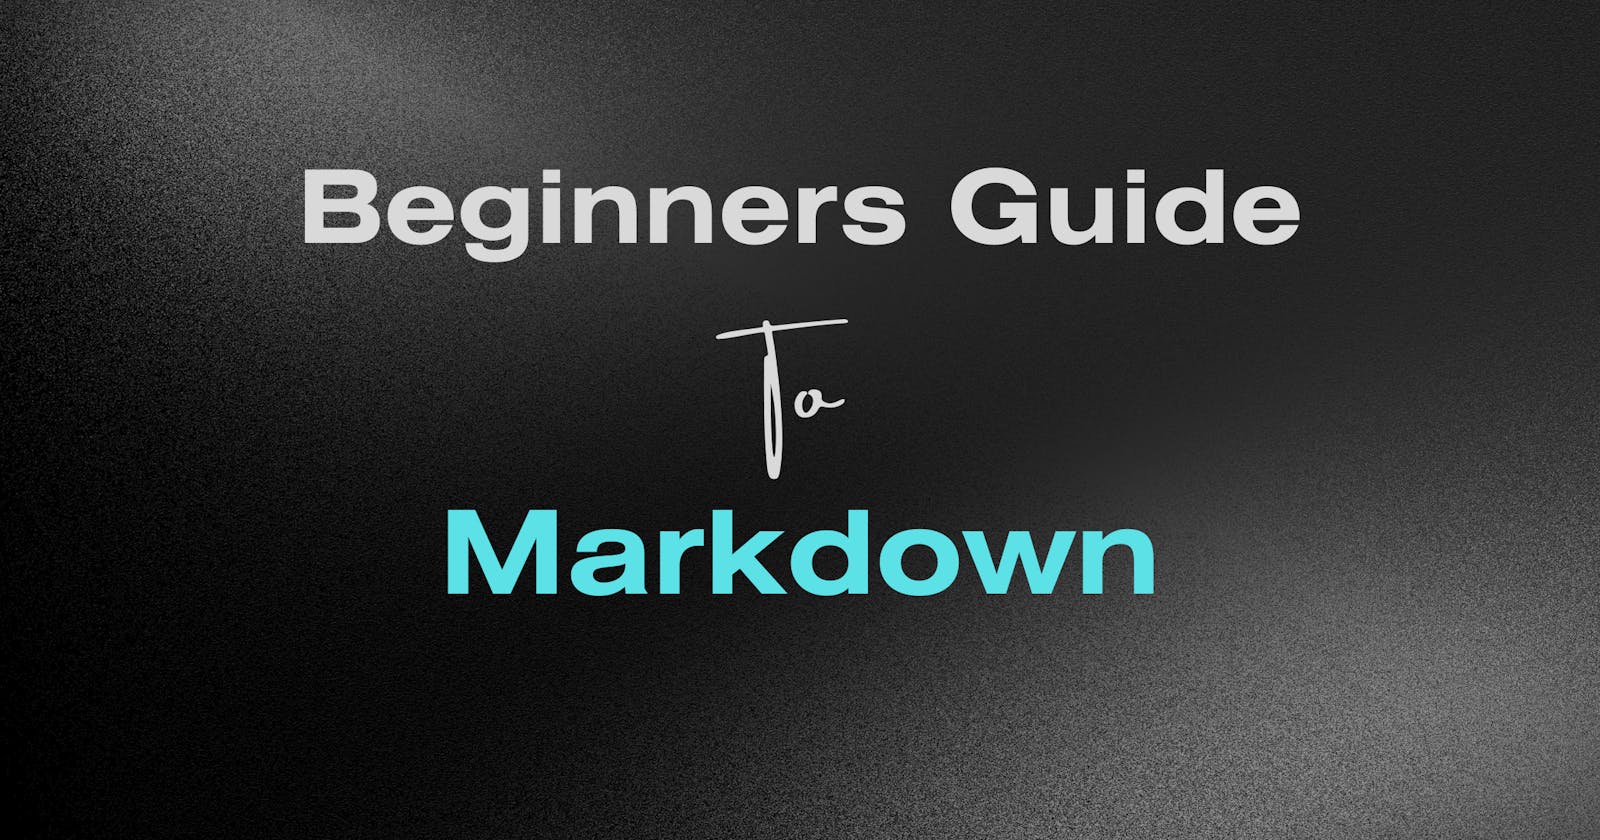 Beginners guide to Markdown